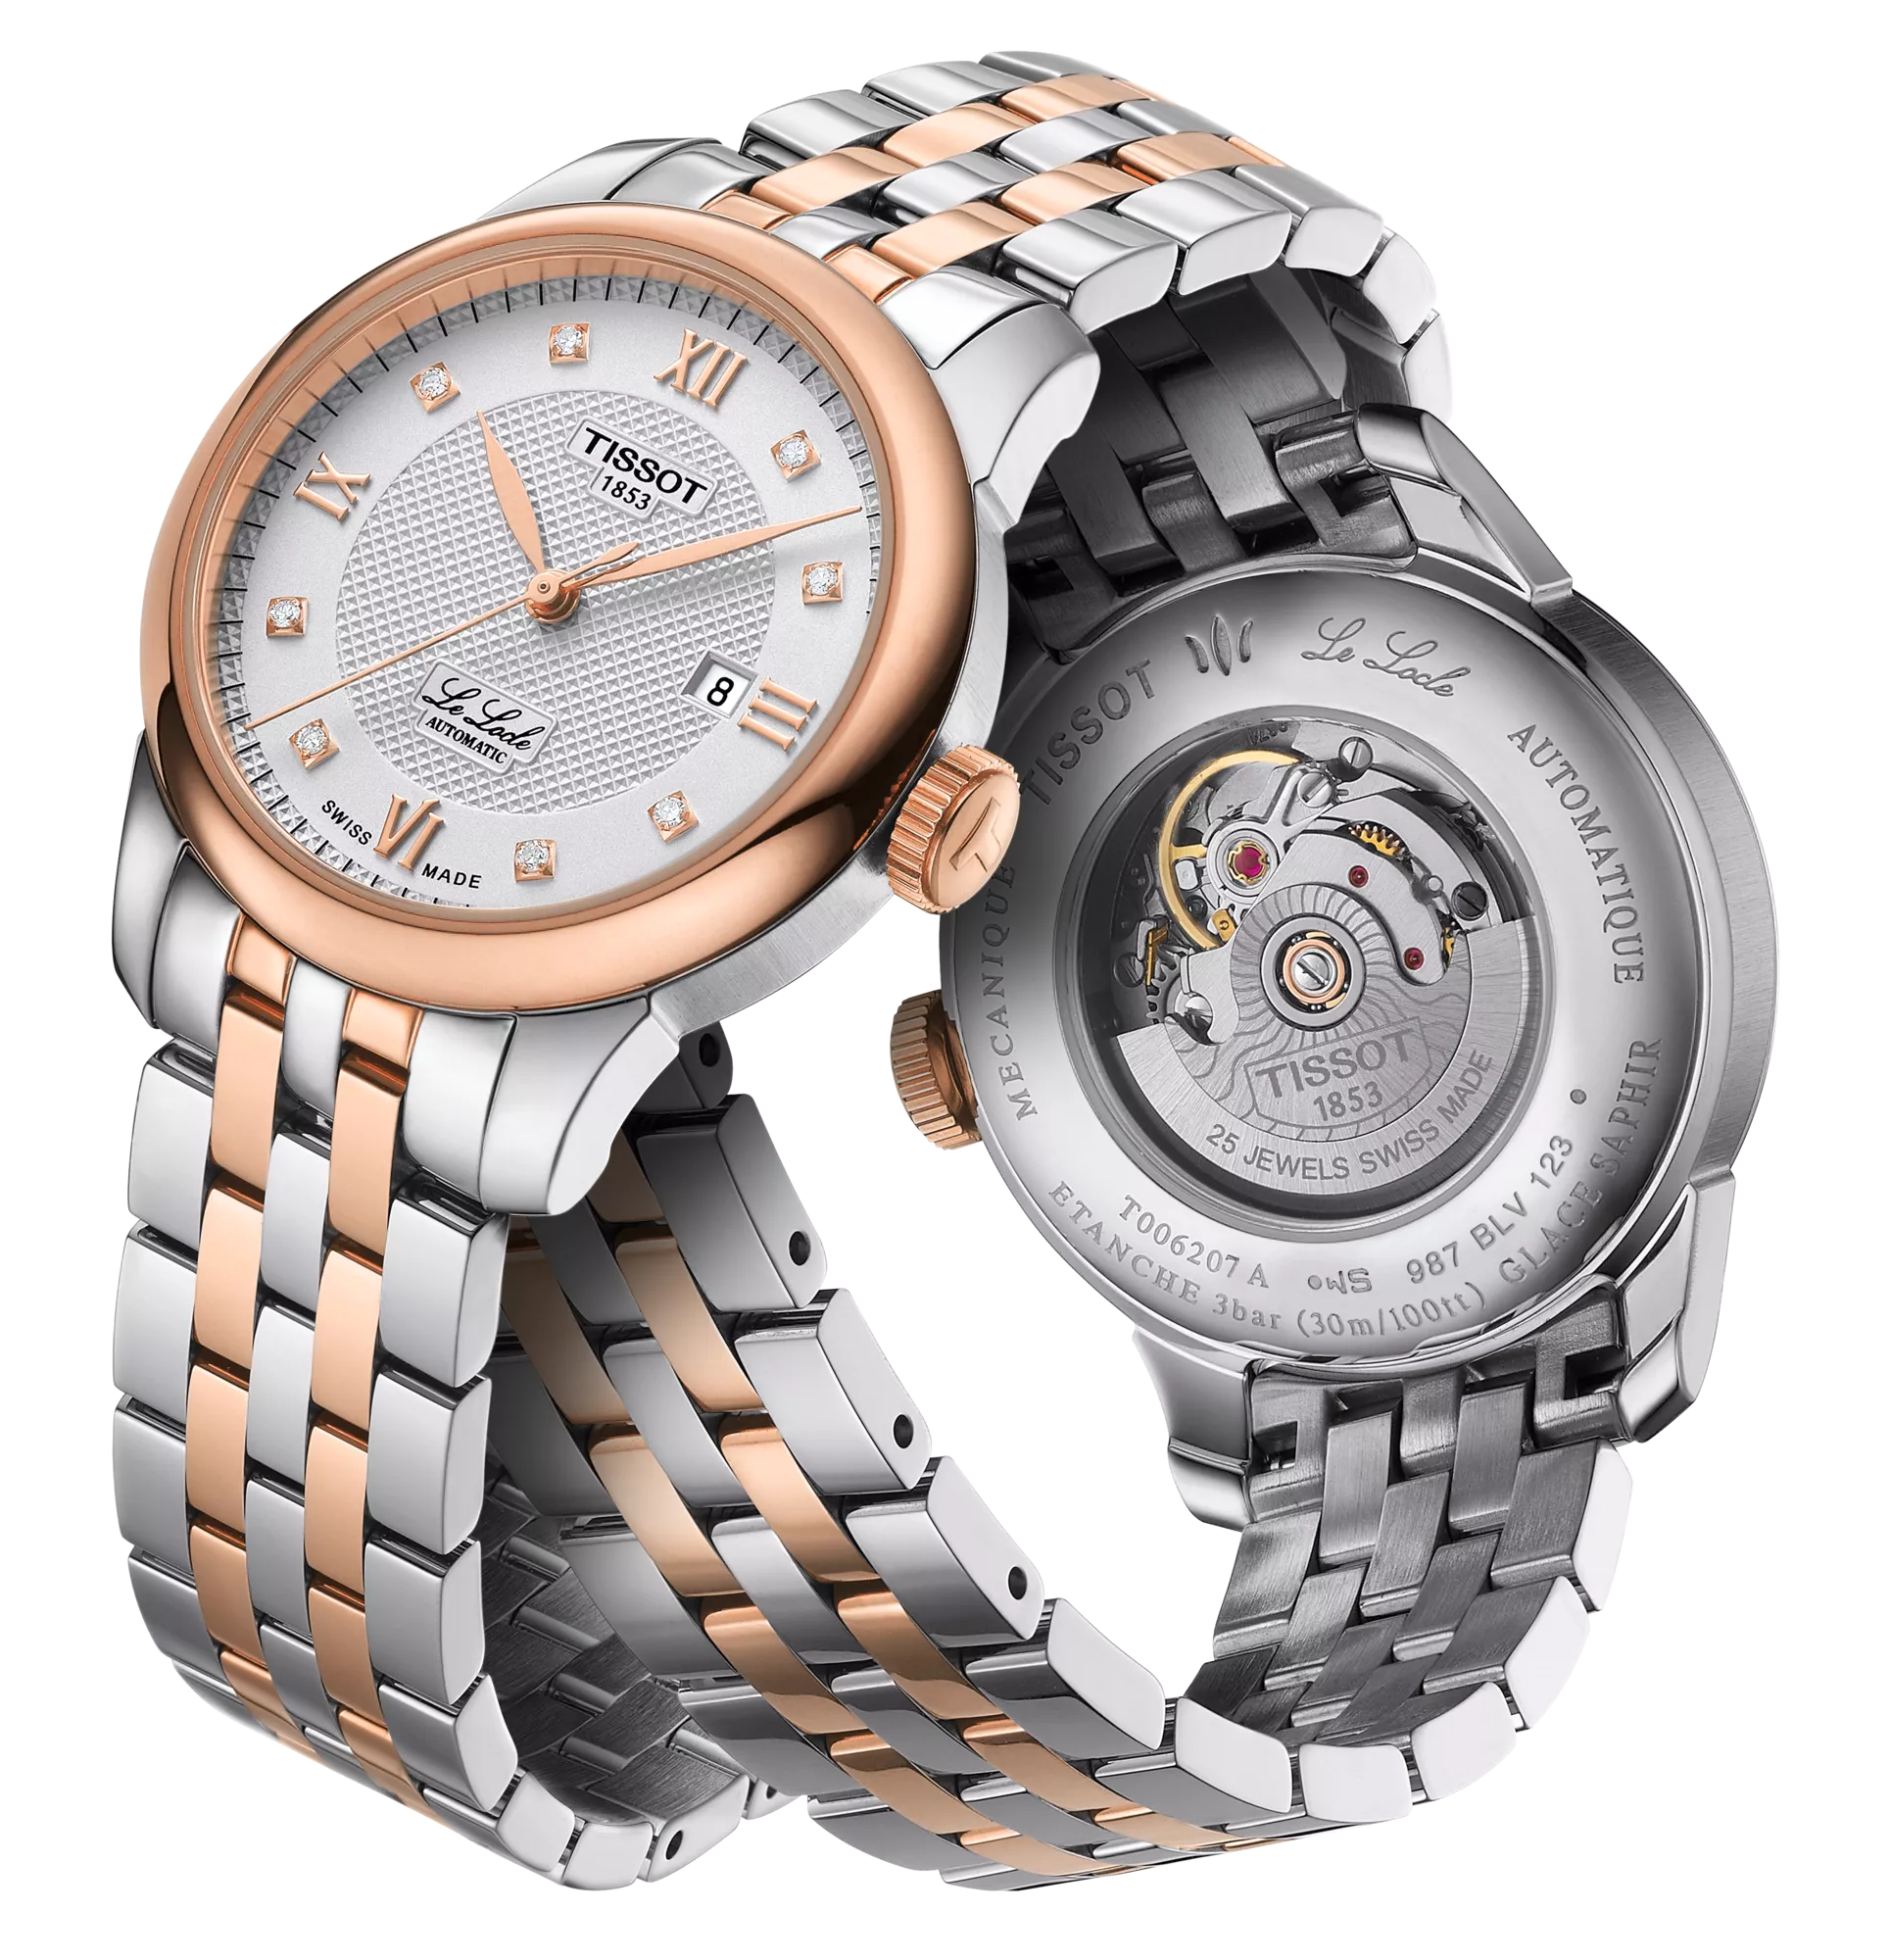 Tissot Le Locle Special Edition rosa 